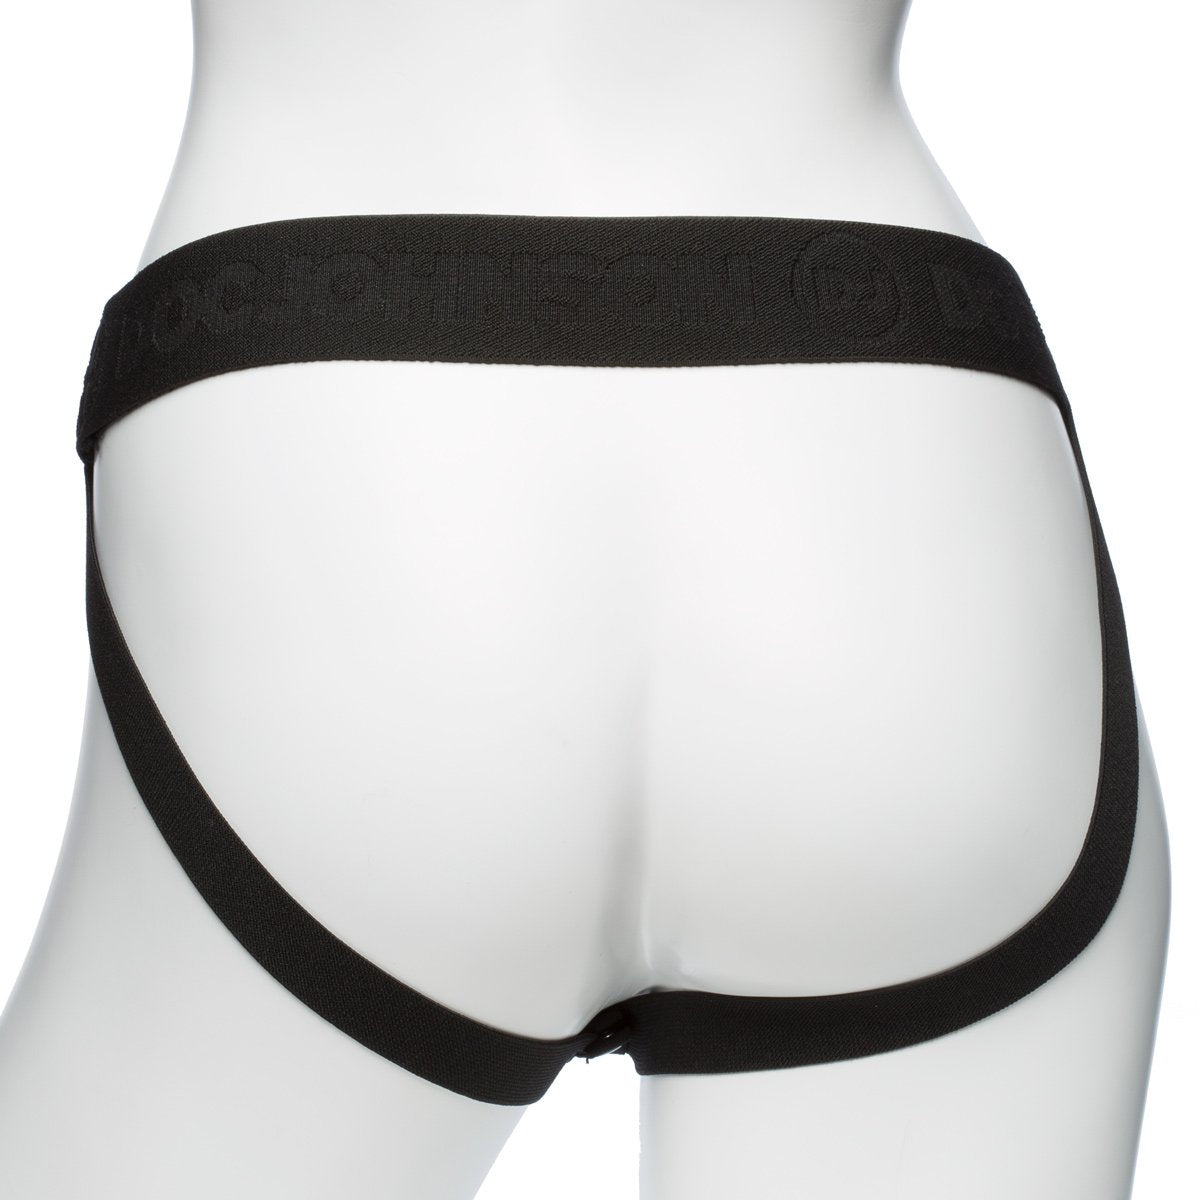 Doc Johnson Body Extensions – Be Strong 2 Piece Strap-On Set - Slim